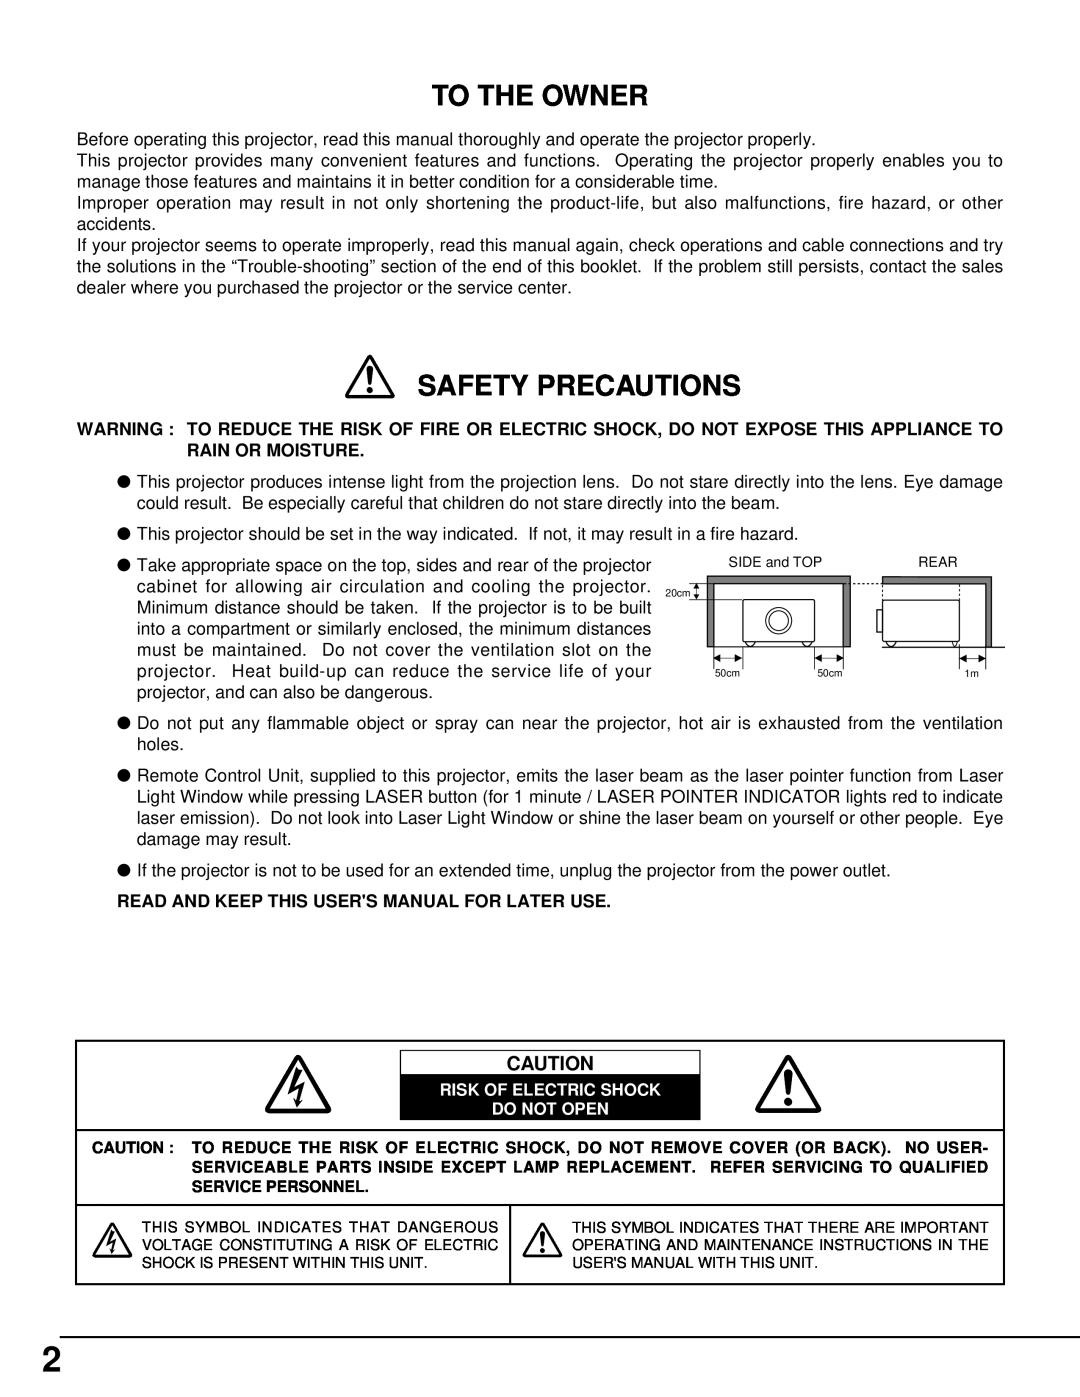 Christie Digital Systems 38-VIV301-01 To The Owner, Safety Precautions, Read And Keep This Users Manual For Later Use 